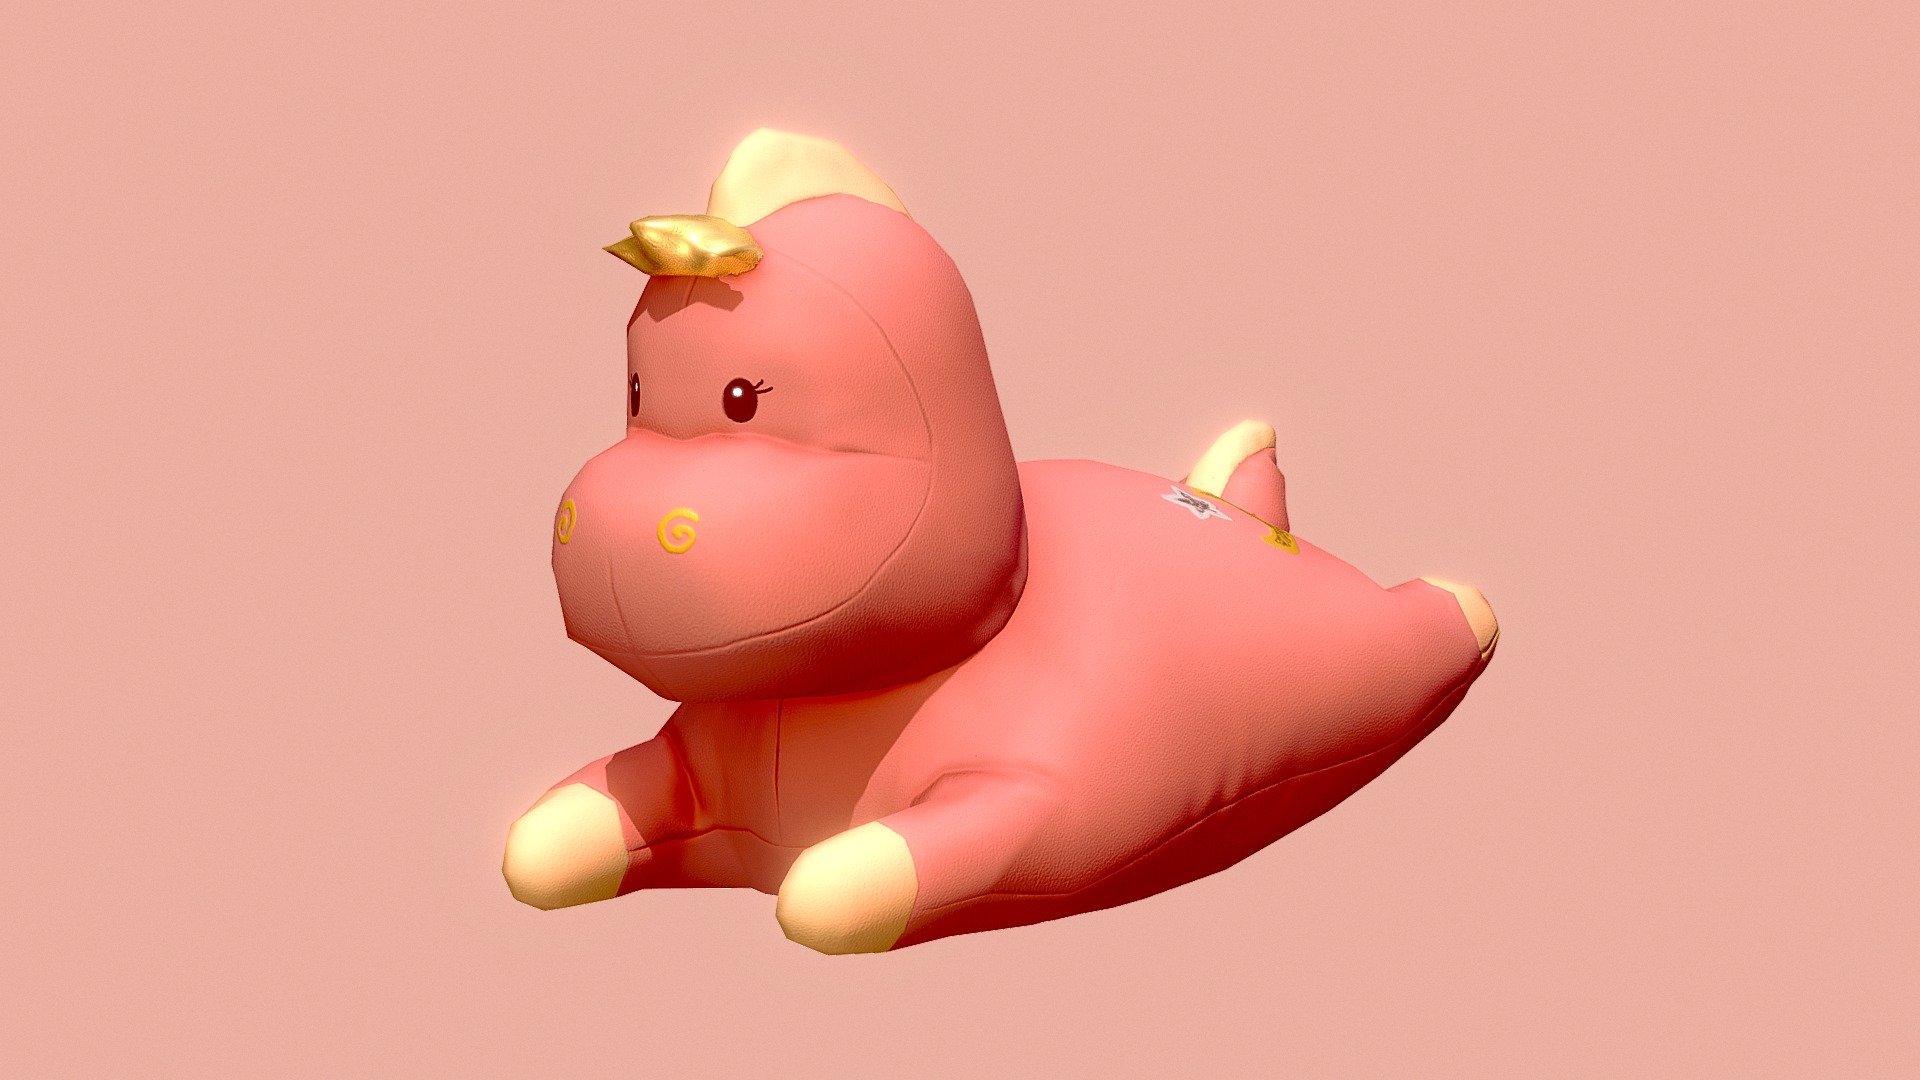 I have a toy like this, so I made it in 3D - Stuffed Dino Pony Toy - 3D model by valeria.fedorova 3d model